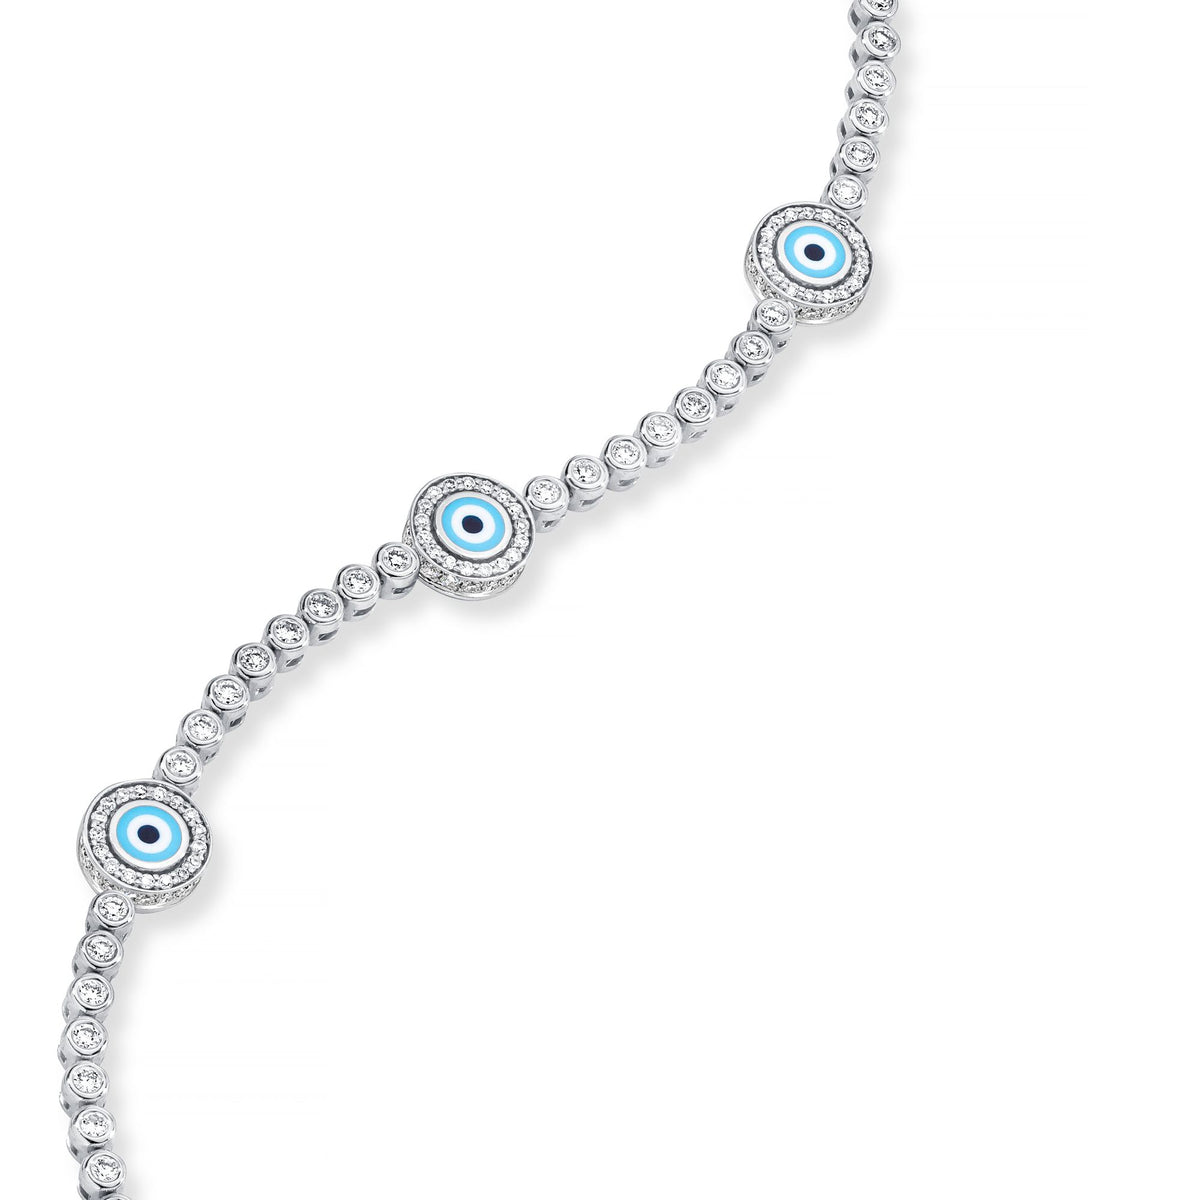 Aaron Basha 18K Baguette Diamond Charms on Diamond Bracelet - Items Sold Separately 18K White Gold Baguette Horseshoe with Pink Sapphires - Pre Order